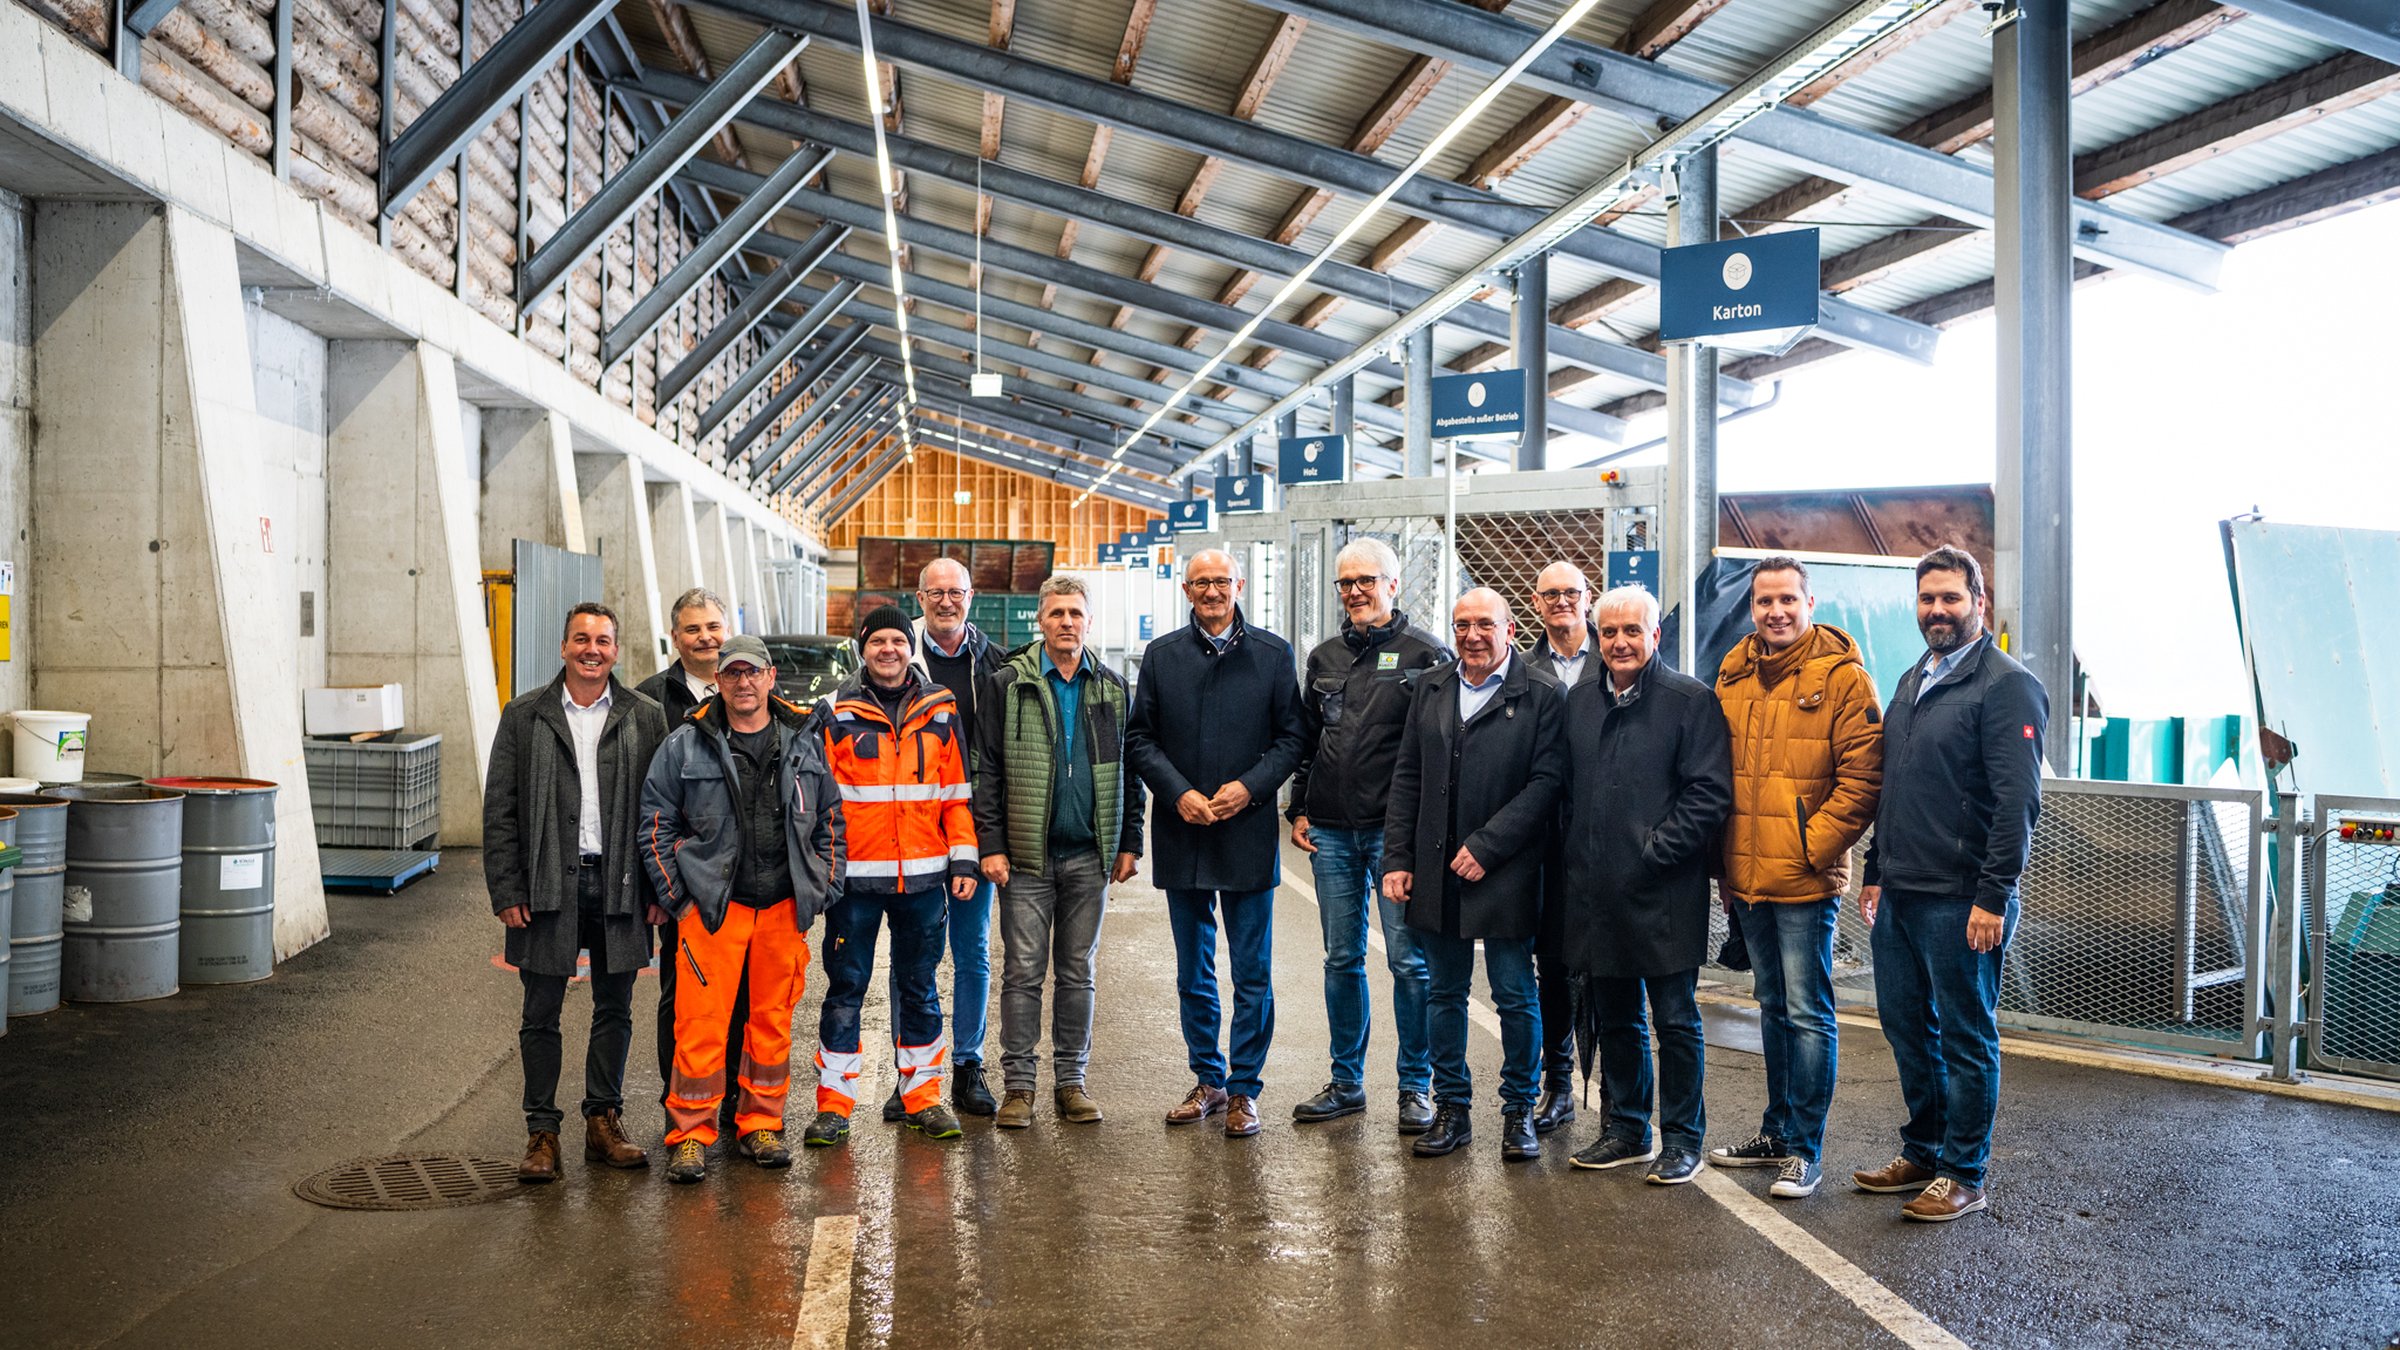 Wiegon - Governor Toni Mattle visits the Ischgl recycling center